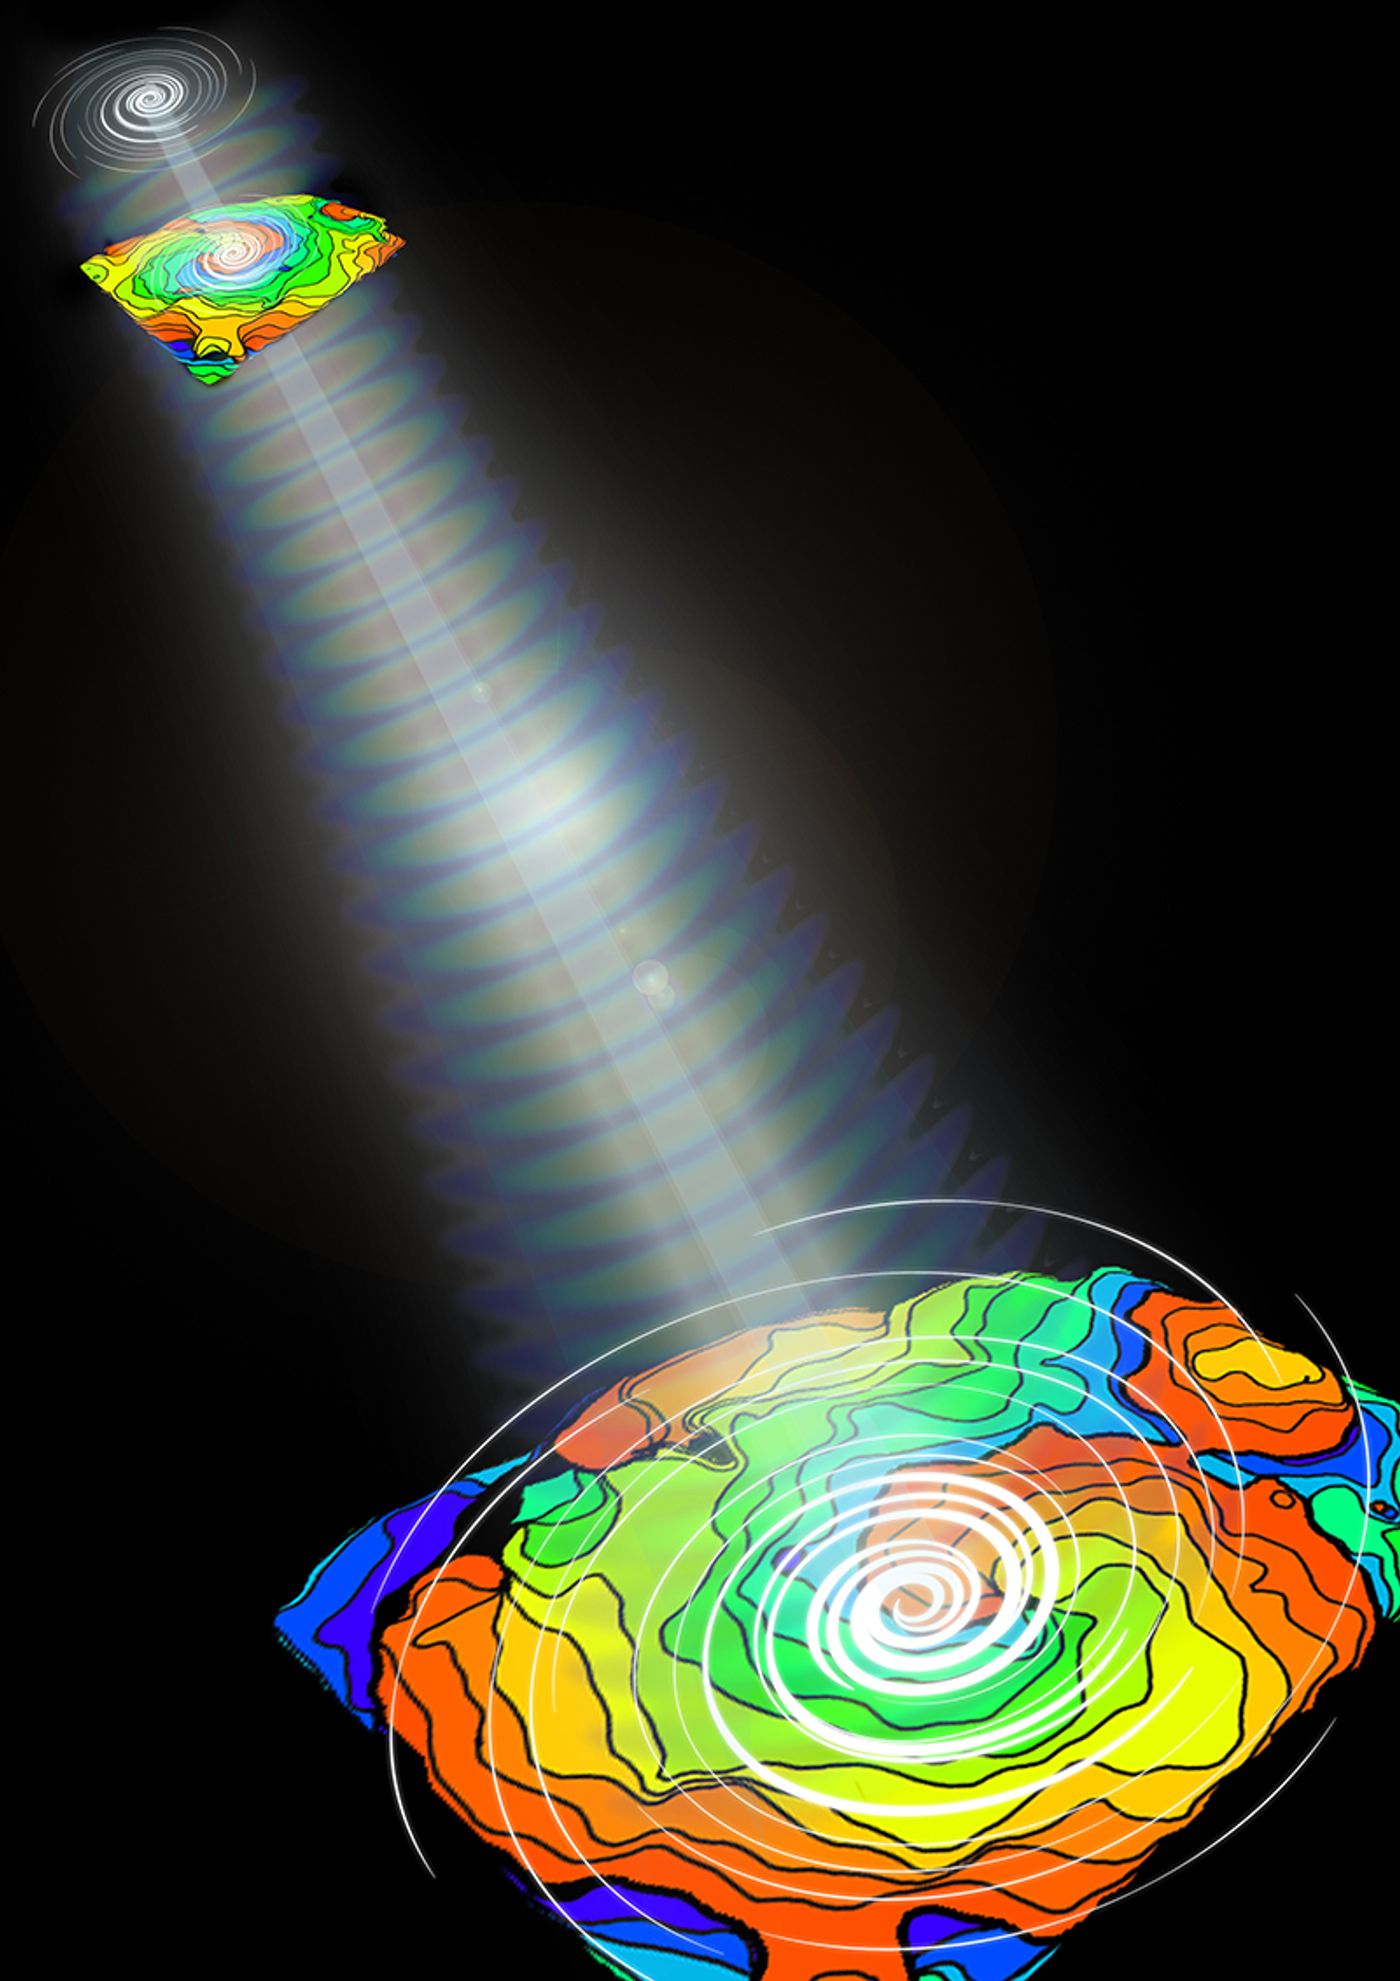 Using light patterns, researchers were able to control the direction of cardiac electrical waves (color maps), which form distinct spirals during arrhythmias. (Credit: Eana Park)